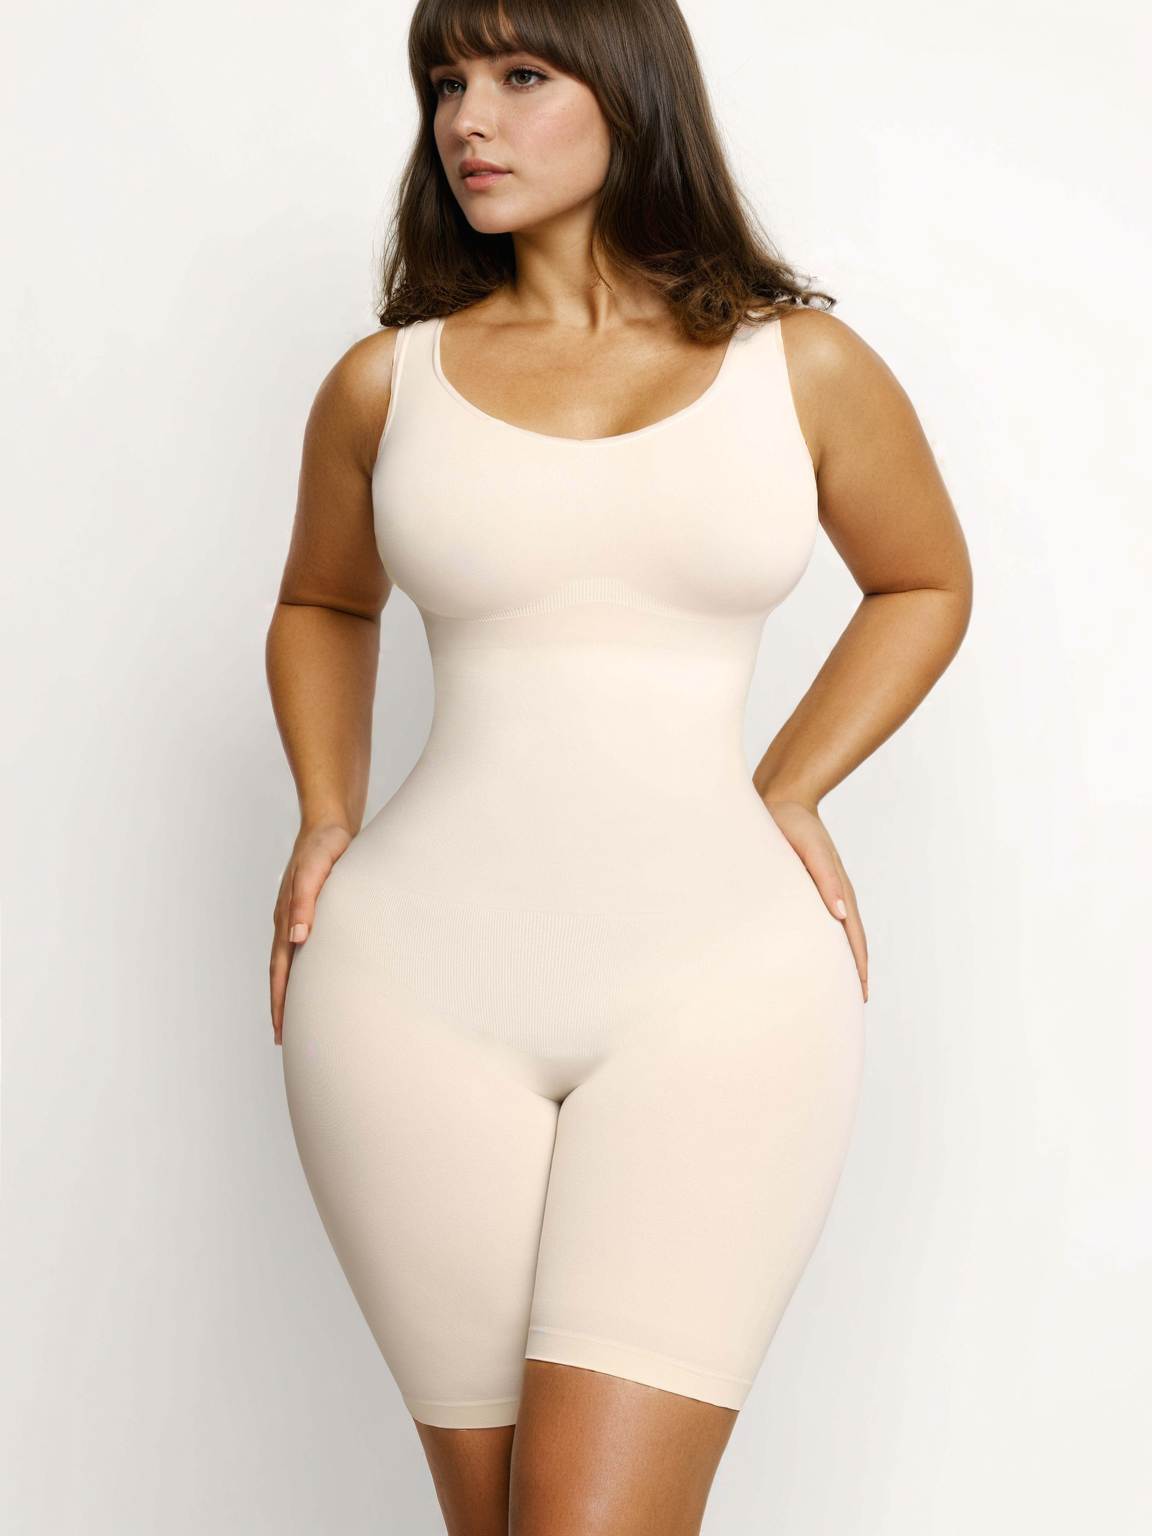 Wholesale Shapewear To Create Slim And Fit Looking Silhouettes 